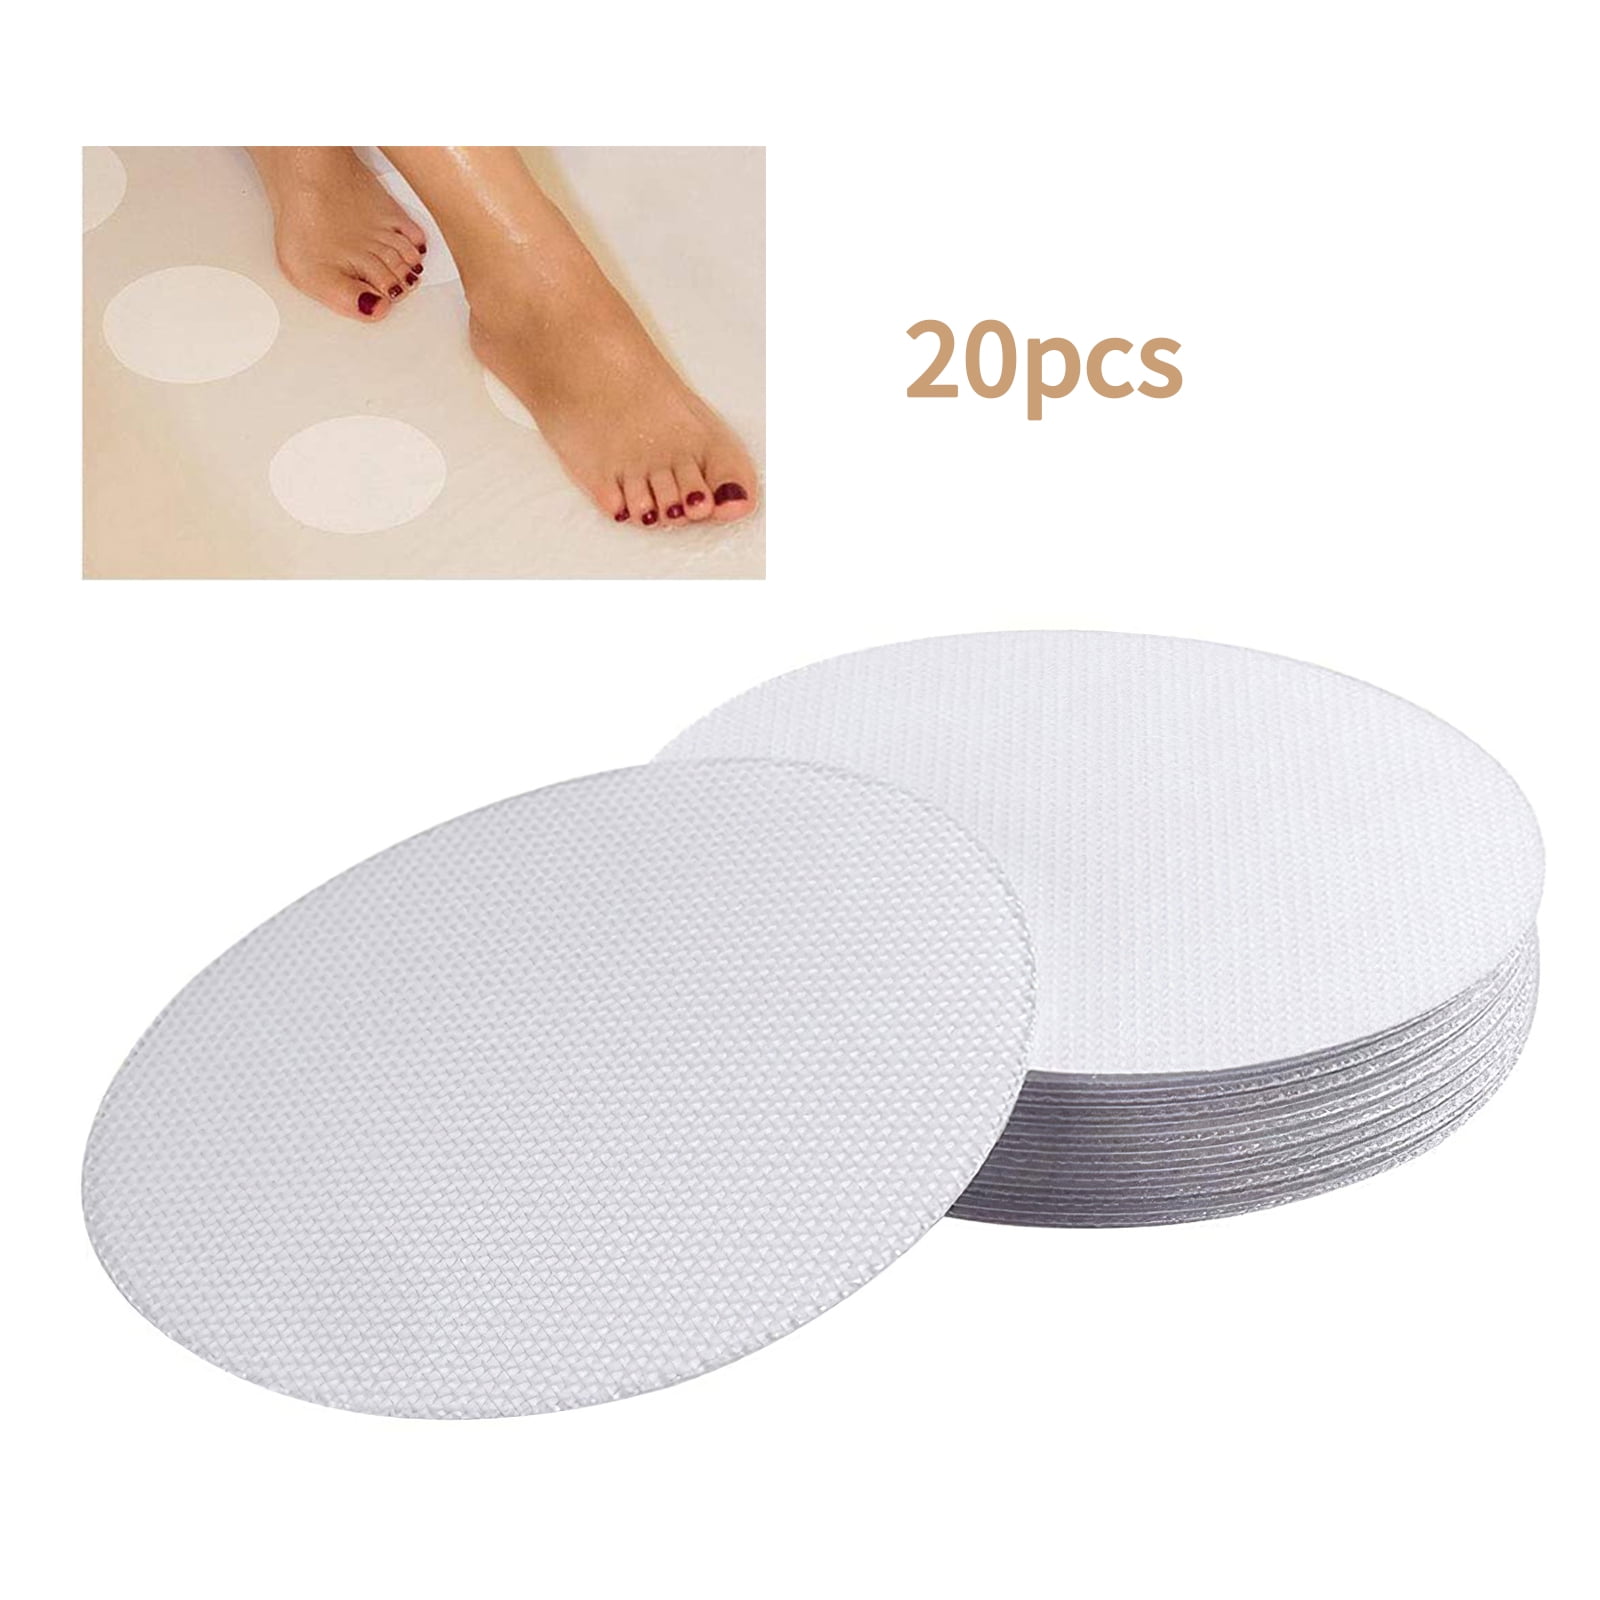 Safety for Baby Kids Adults Elderly 1pcs Scraper INTVN Self Adhesive Bathtub Stickers 20 PCS Round Non-Slip Bath Stickers Textured Shower Treads Adhesive/Transparent Easy to Install 